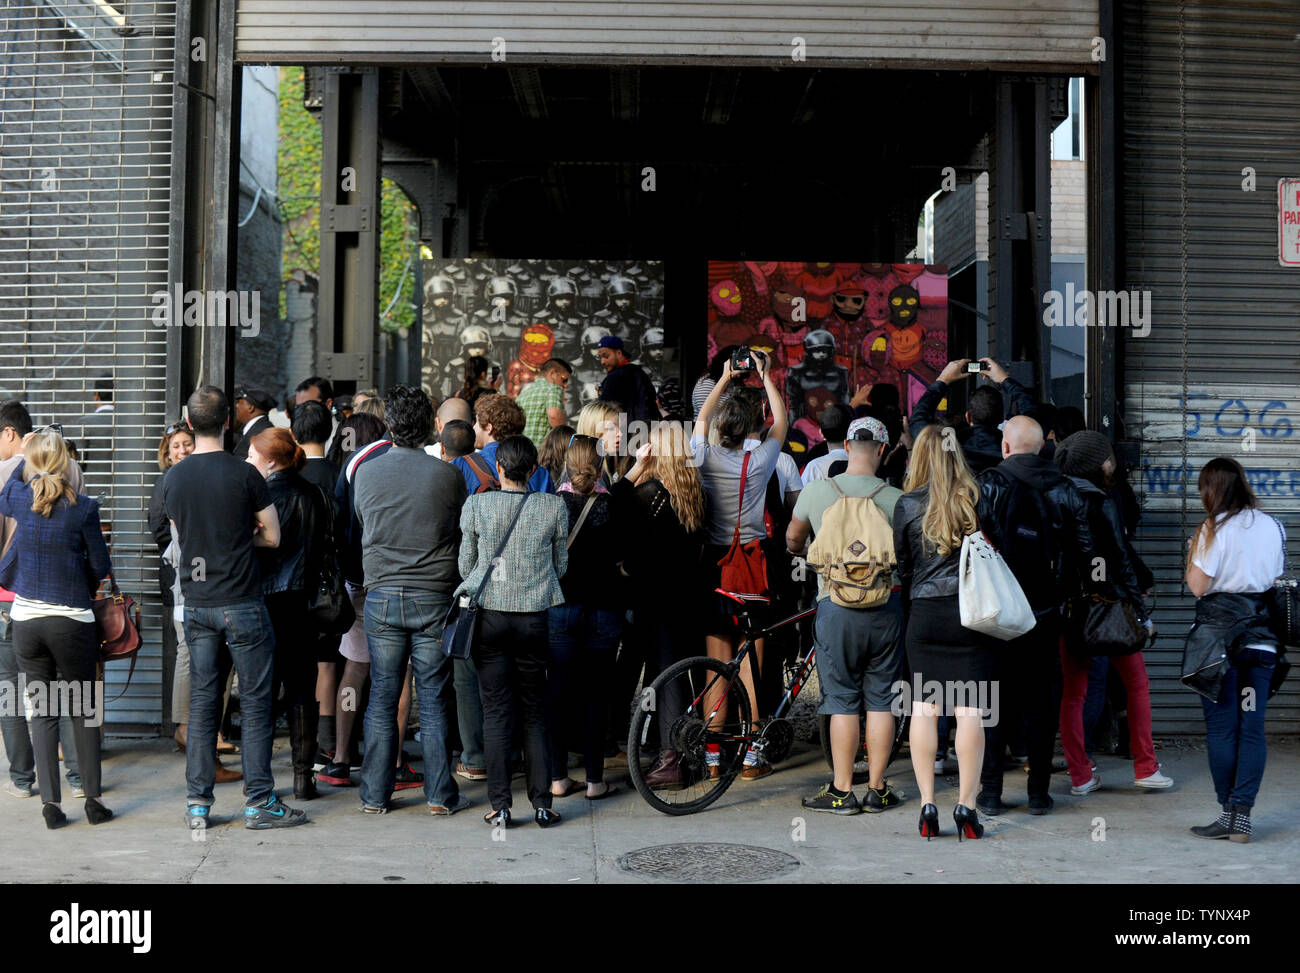 People gather to view a temporary exhibition space with art pieces created by British street artist Banksy on the west side of Manhattan in New York City on October 18, 2013. Banksy is a pseudonymous England-based graffiti artist, political activist, film director, and painter. His satirical street art and subversive epigrams combine dark humor with graffiti done in a distinctive stenciling technique.    UPI/Dennis Van Tine Stock Photo